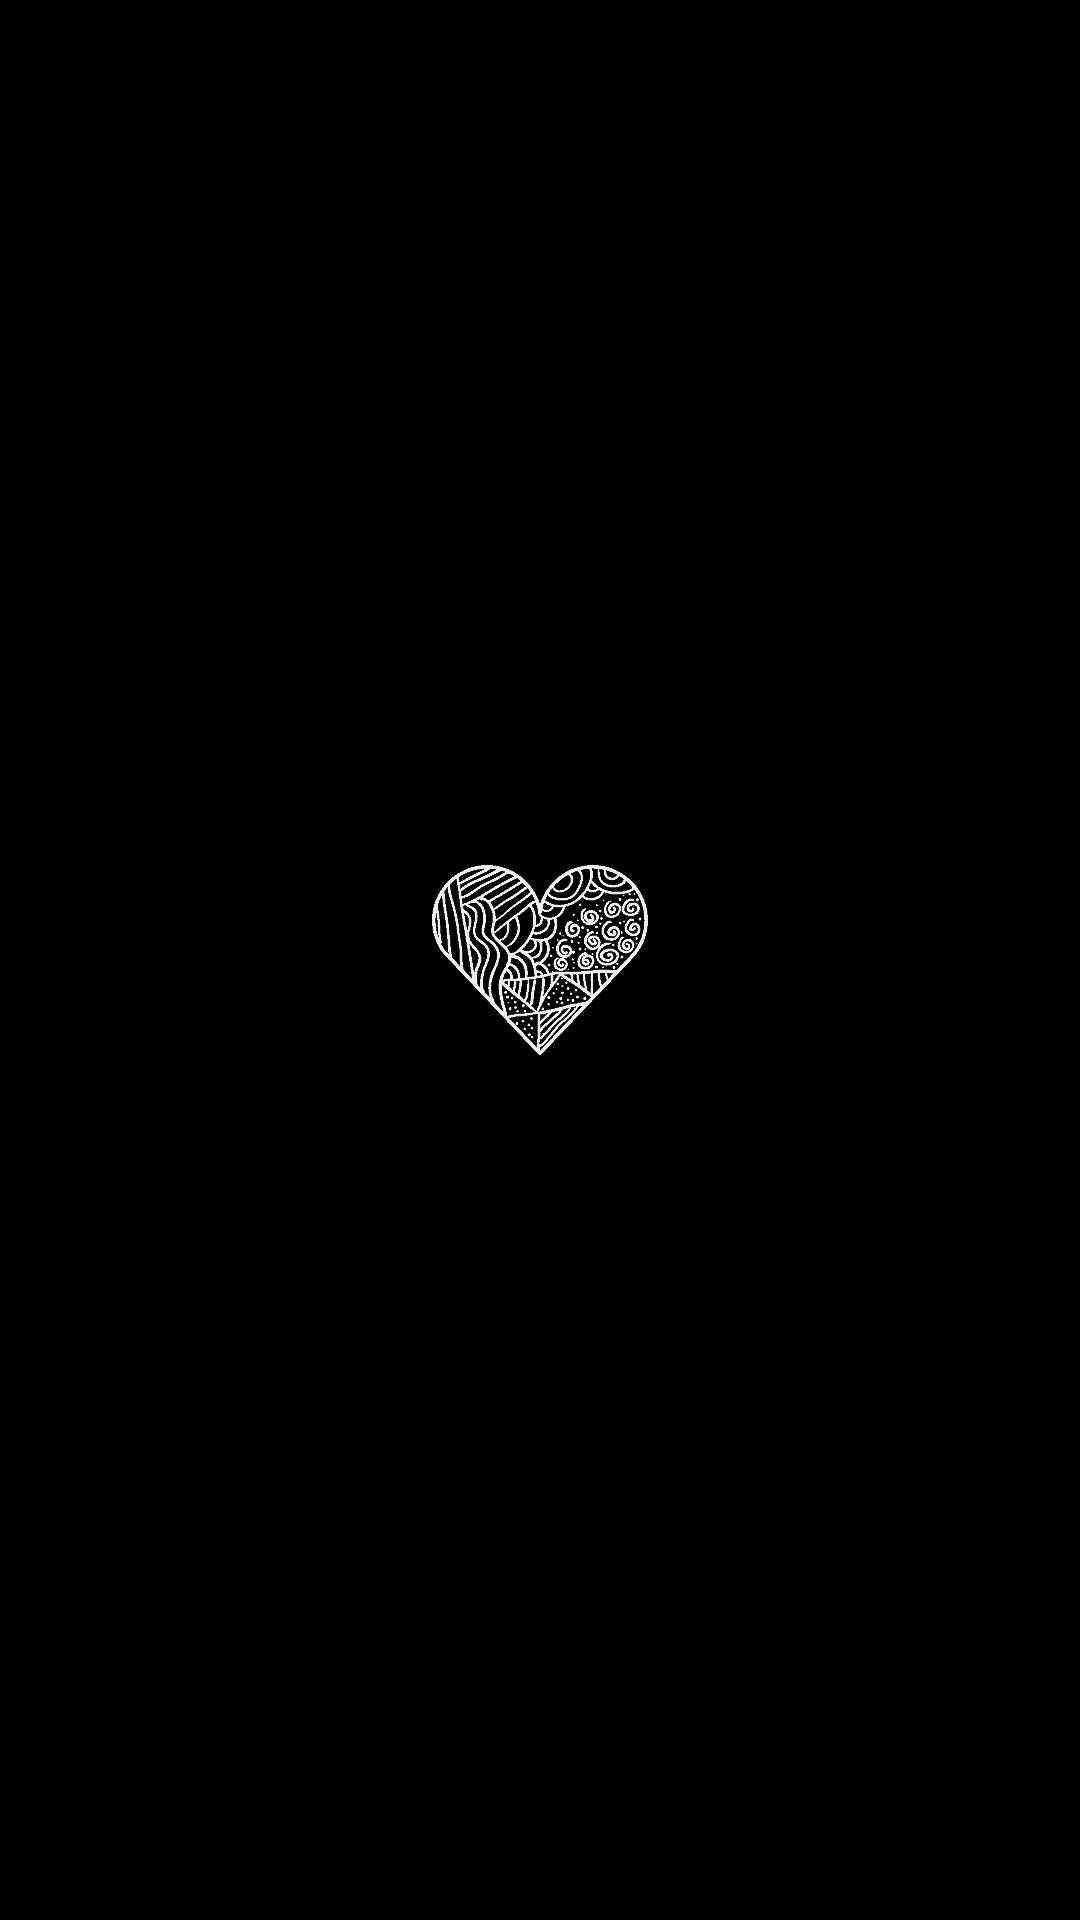 Black background with a white heart - Heart, black heart